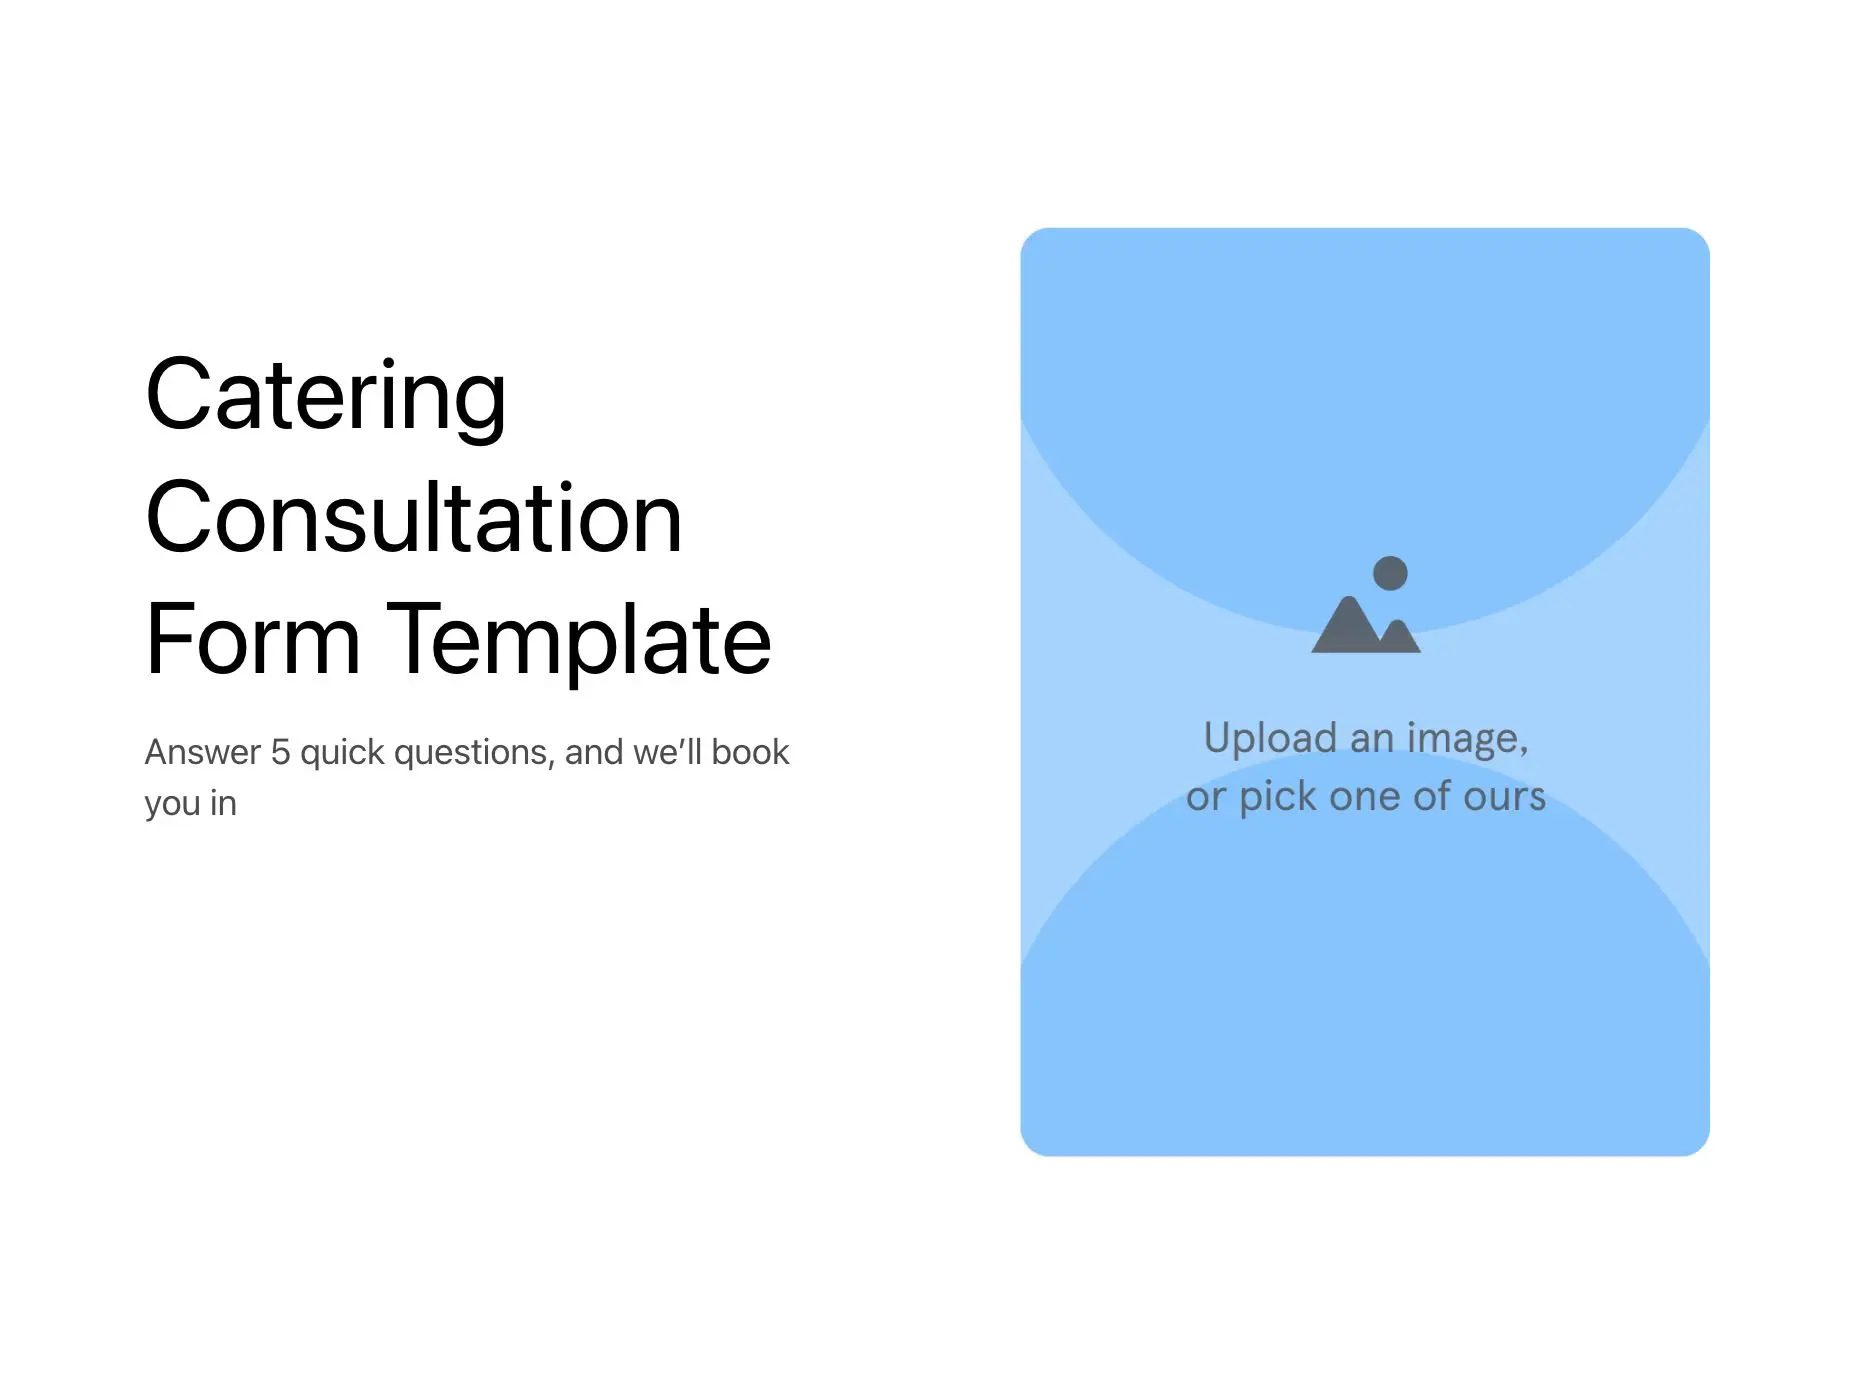 Catering Consultation Form Template Hero